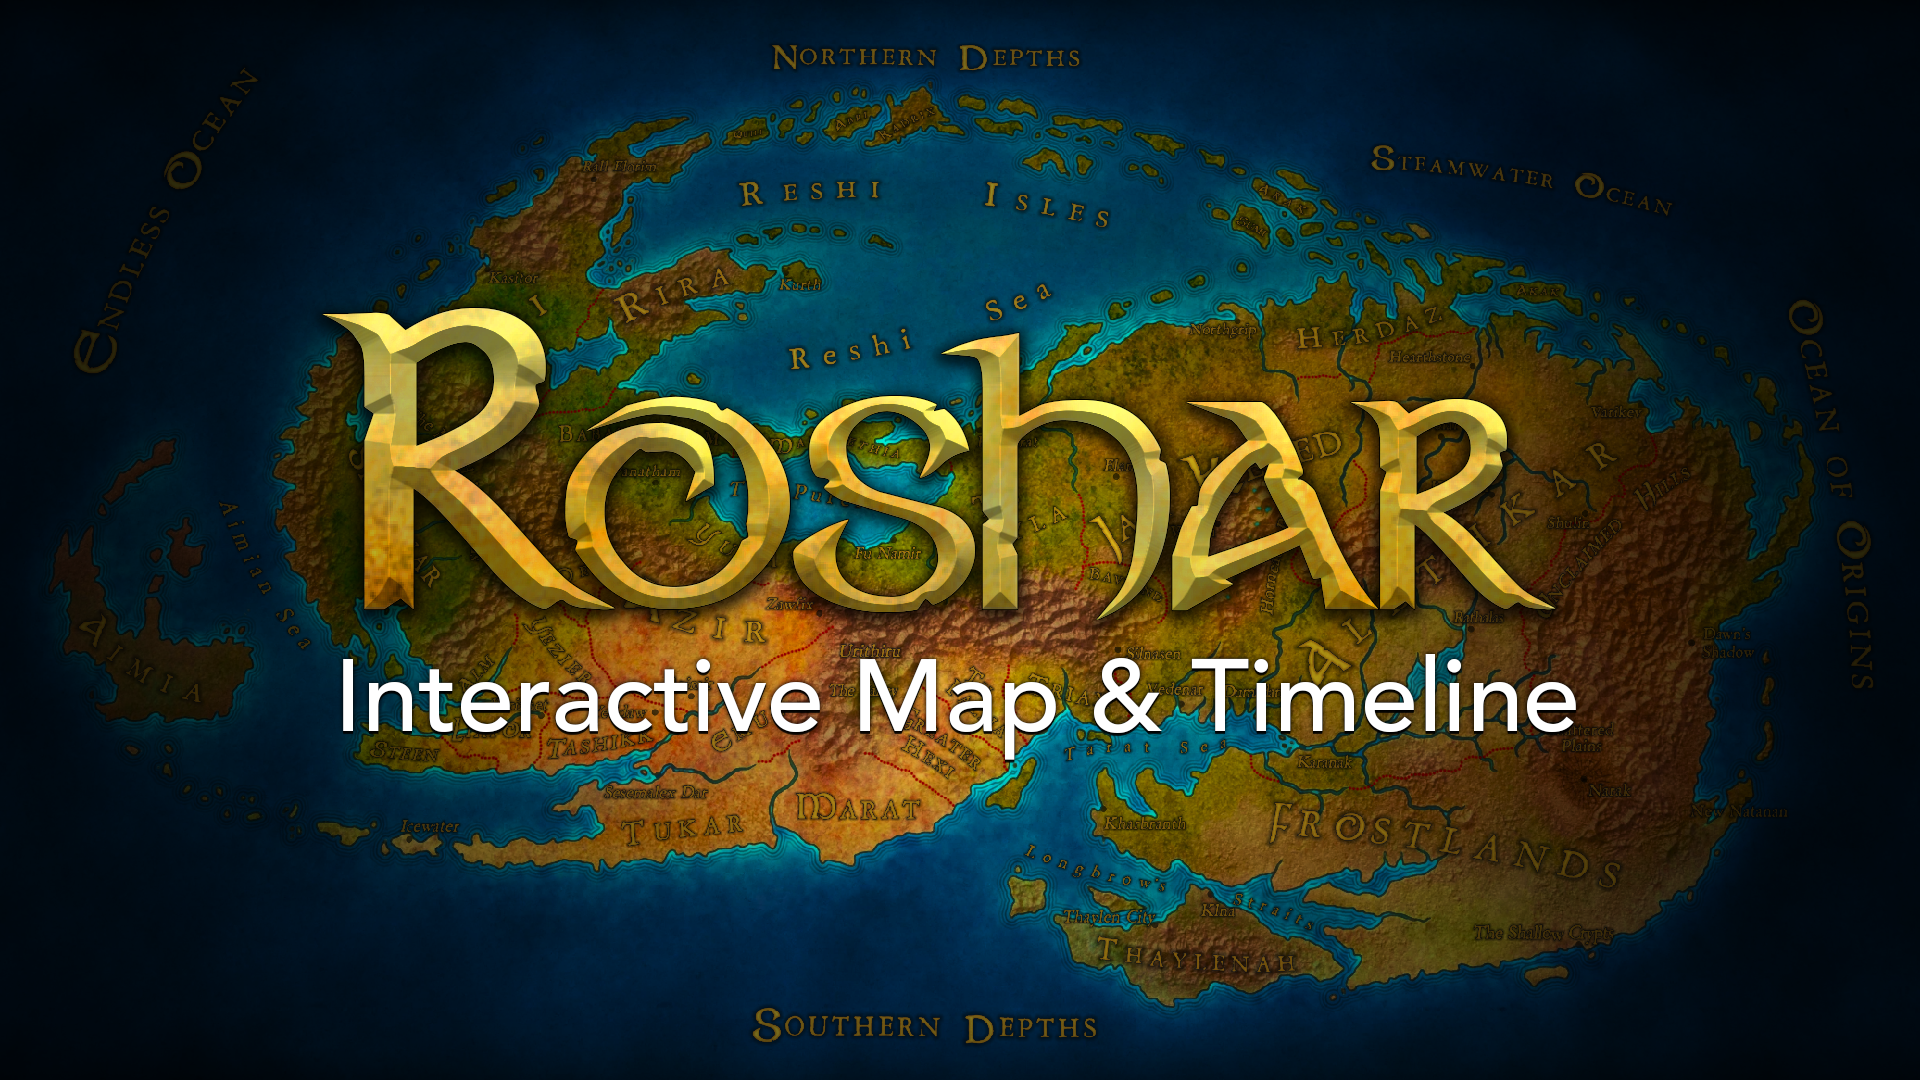 More information about "Announcing: An Interactive Map & Timeline of Roshar"